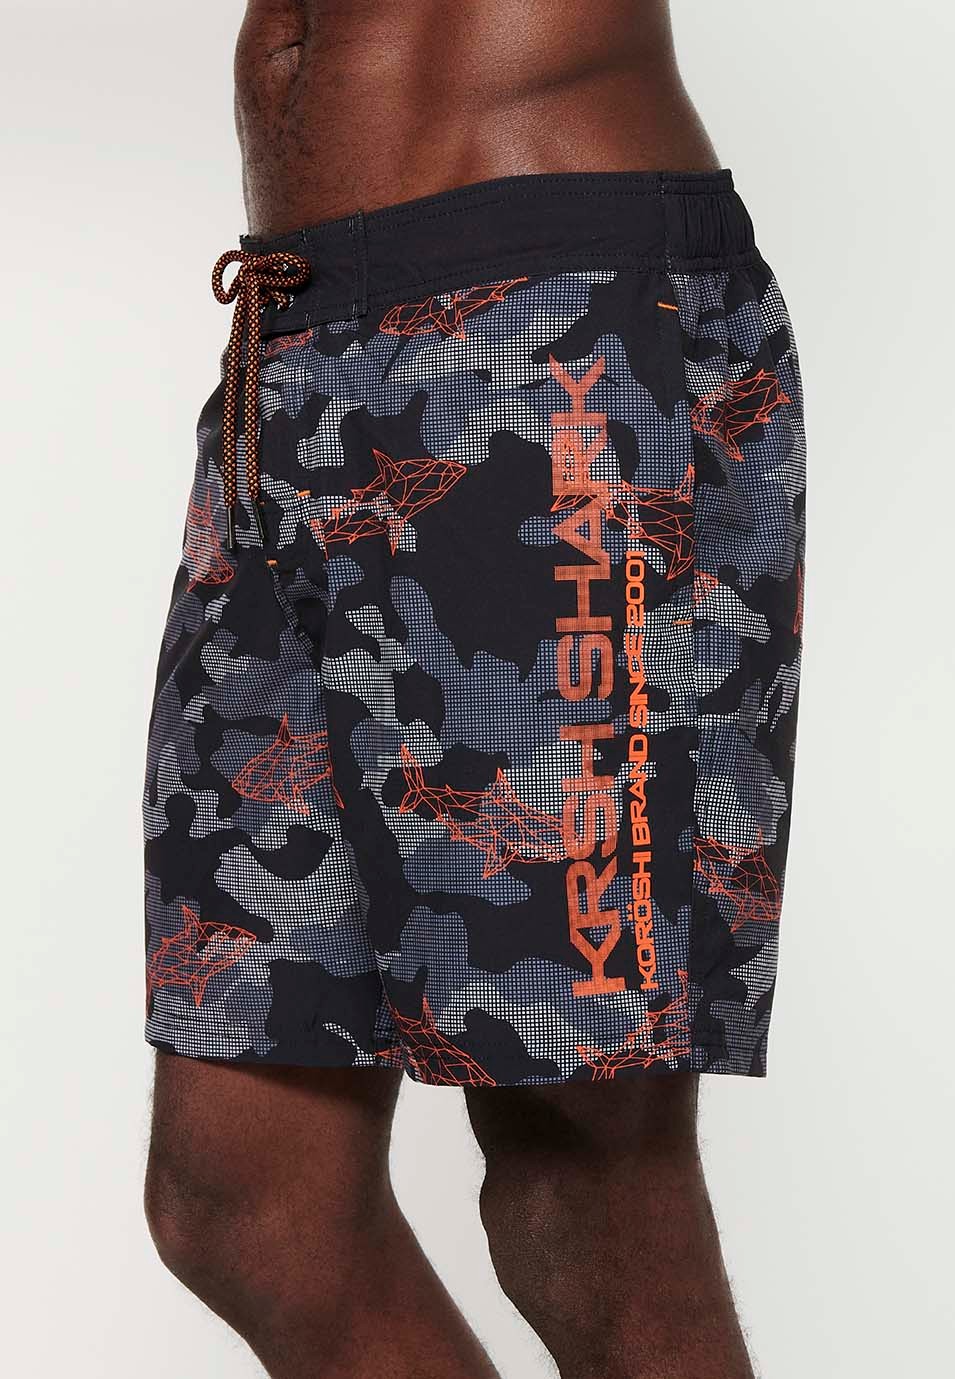 Camouflage printed swim shorts with adjustable waist, black color for men